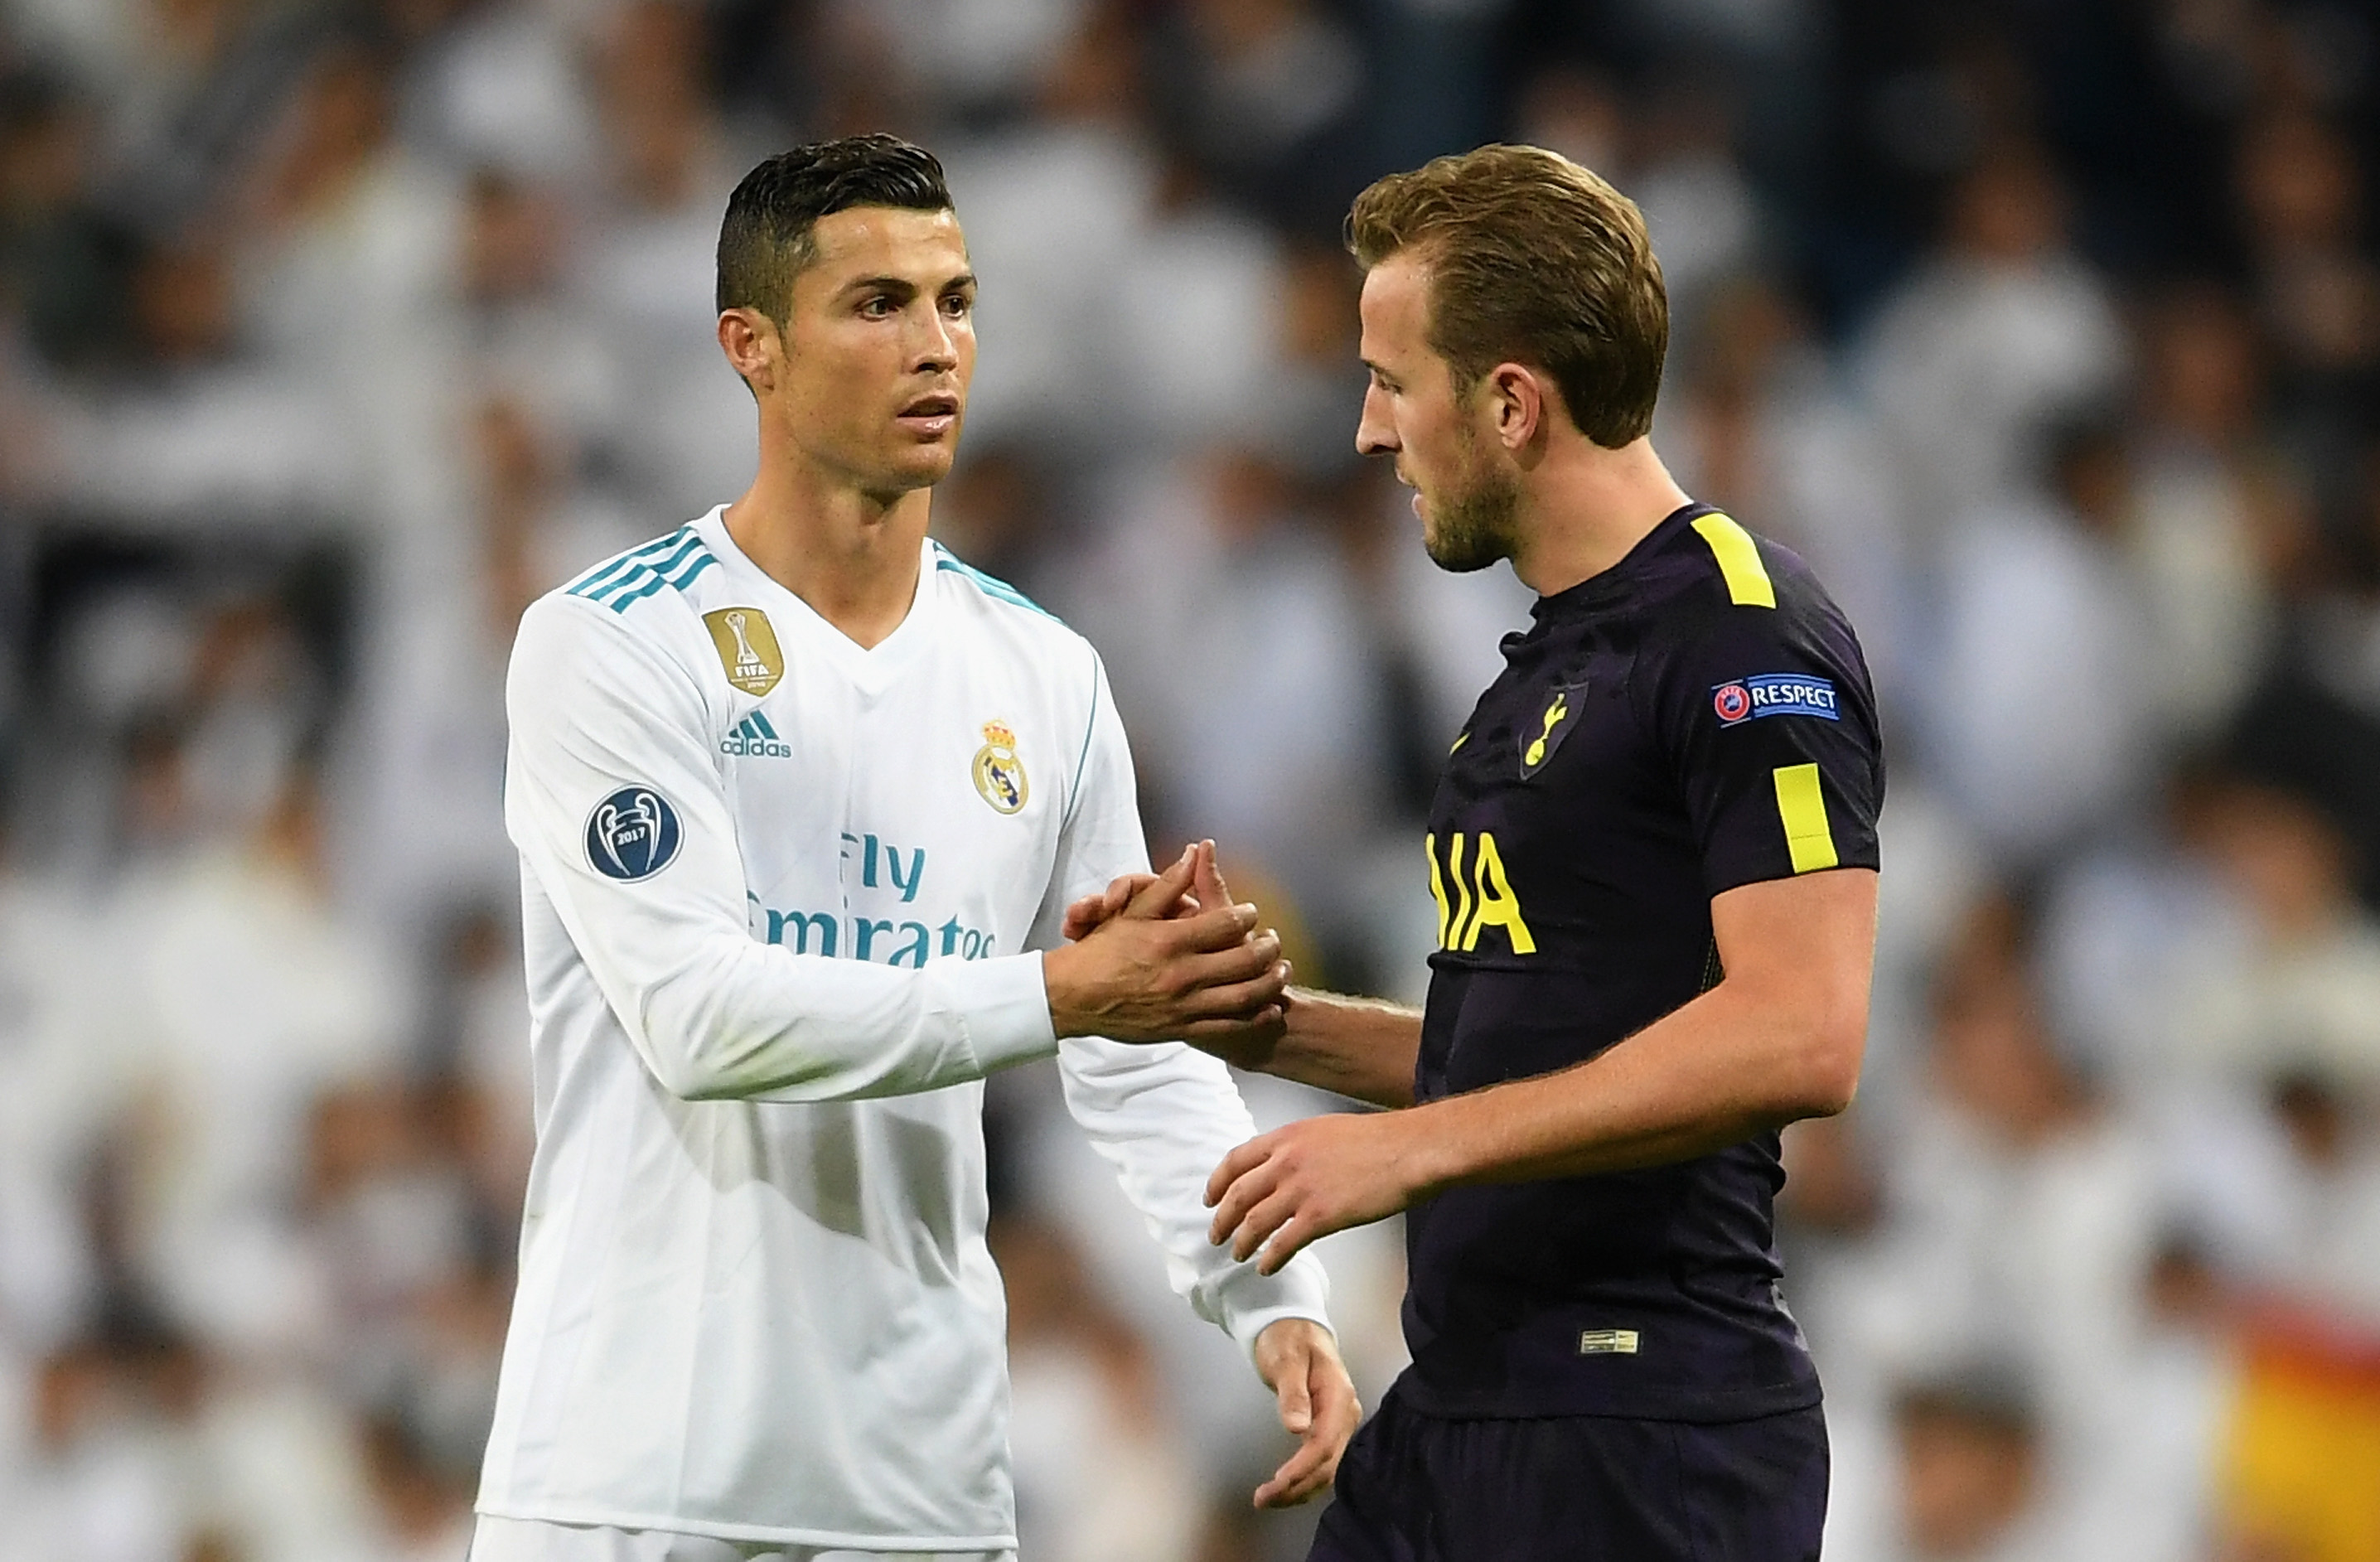 Could Ronaldo and Kane link up at Juventus next season? (Photo by Laurence Griffiths/Getty Images)